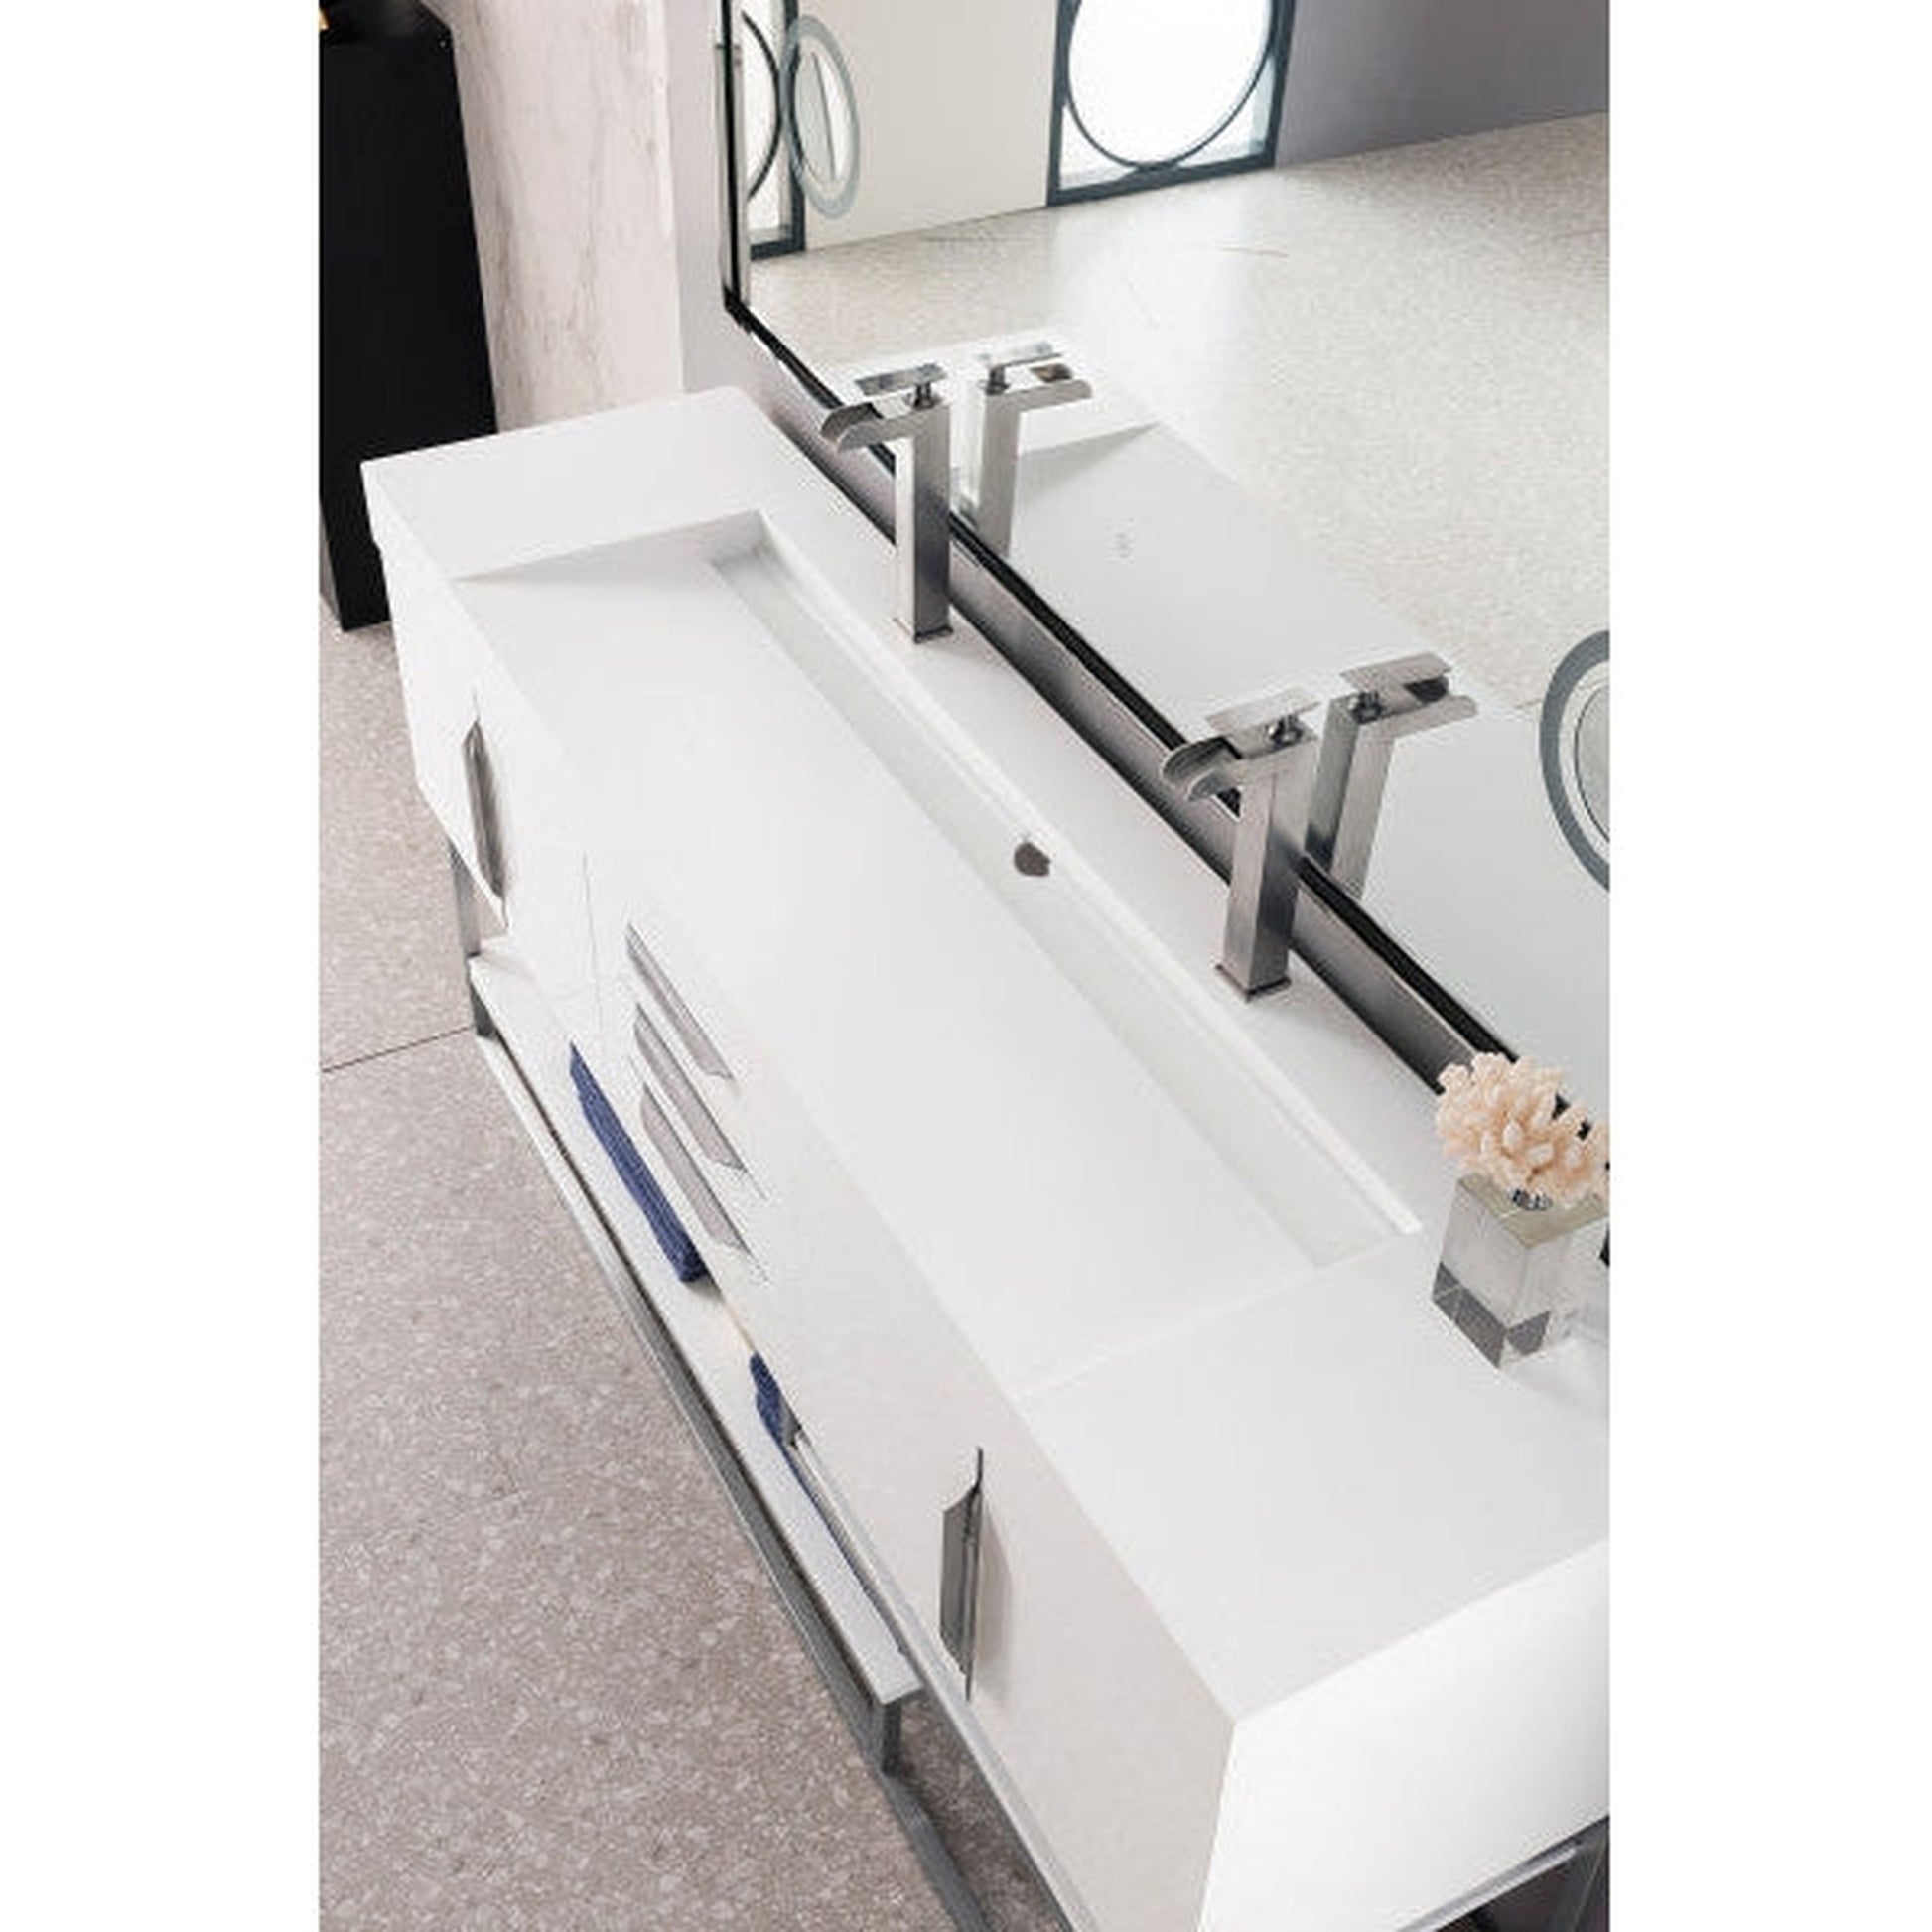 James Martin Columbia 73" Double Glossy White Bathroom Vanity With 6" Glossy White Composite Countertop